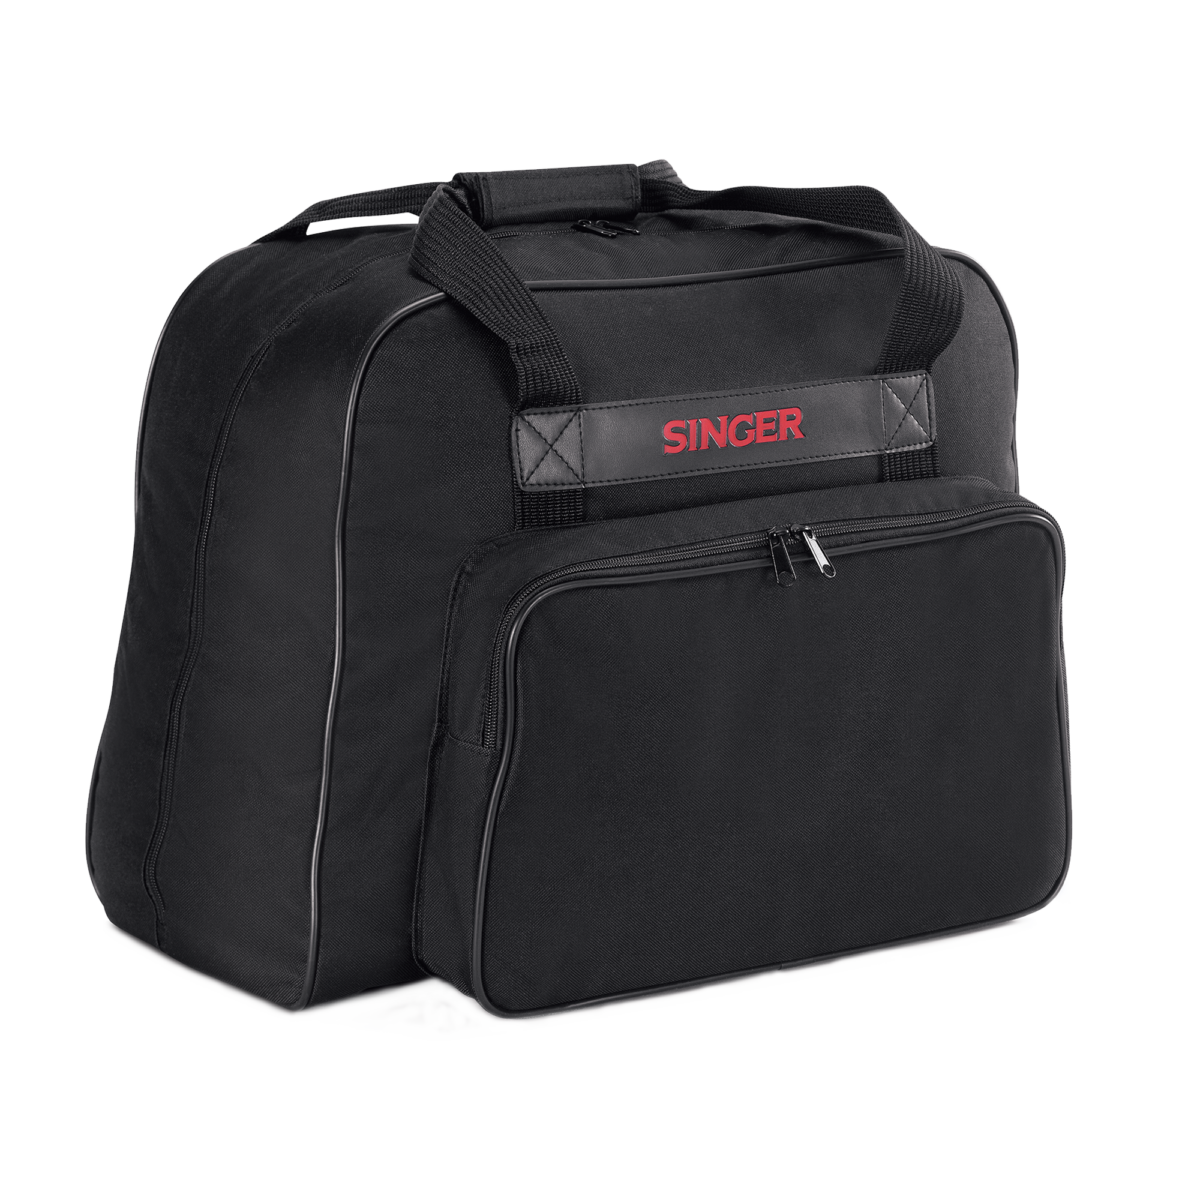 Black-carry-bag-front-angle